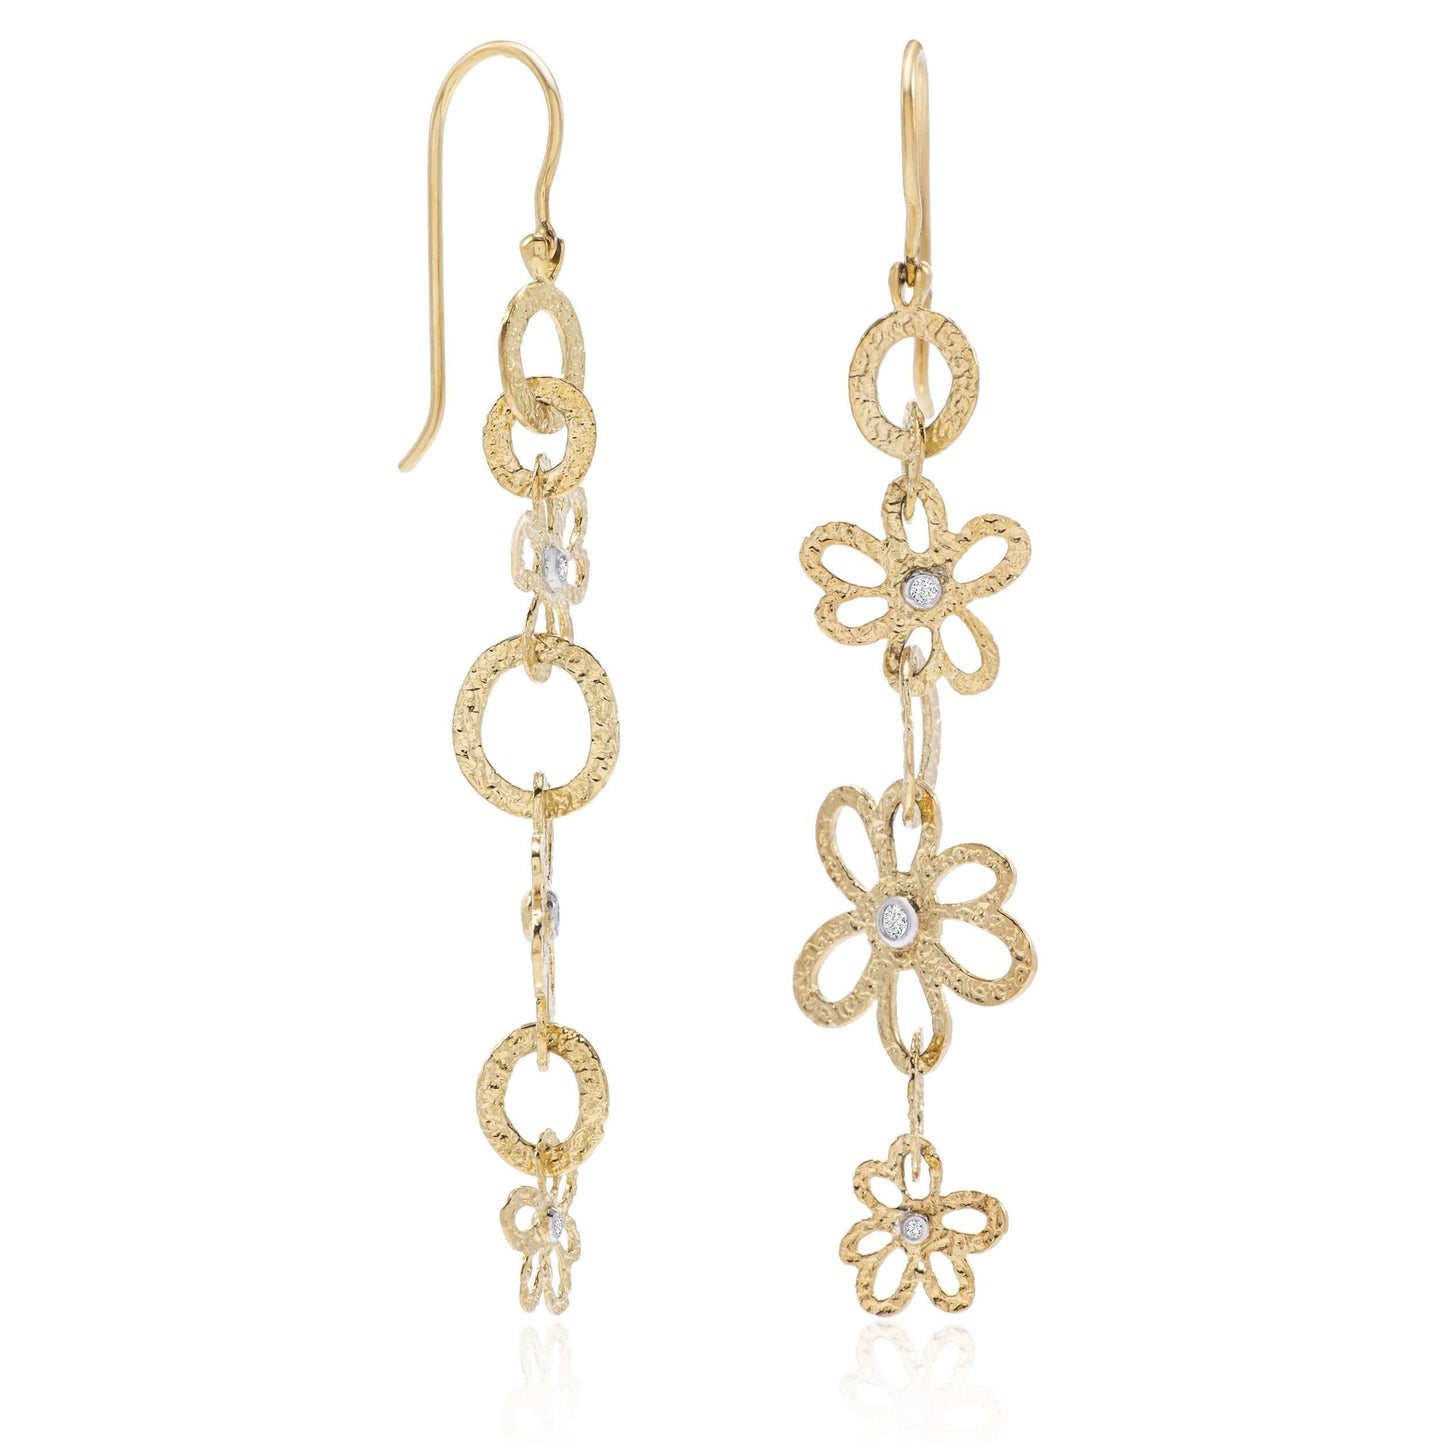 Dalia T Online Earrings Nature Collection 14KT Yellow Gold & Diamonds Flower Combination Long Earrings